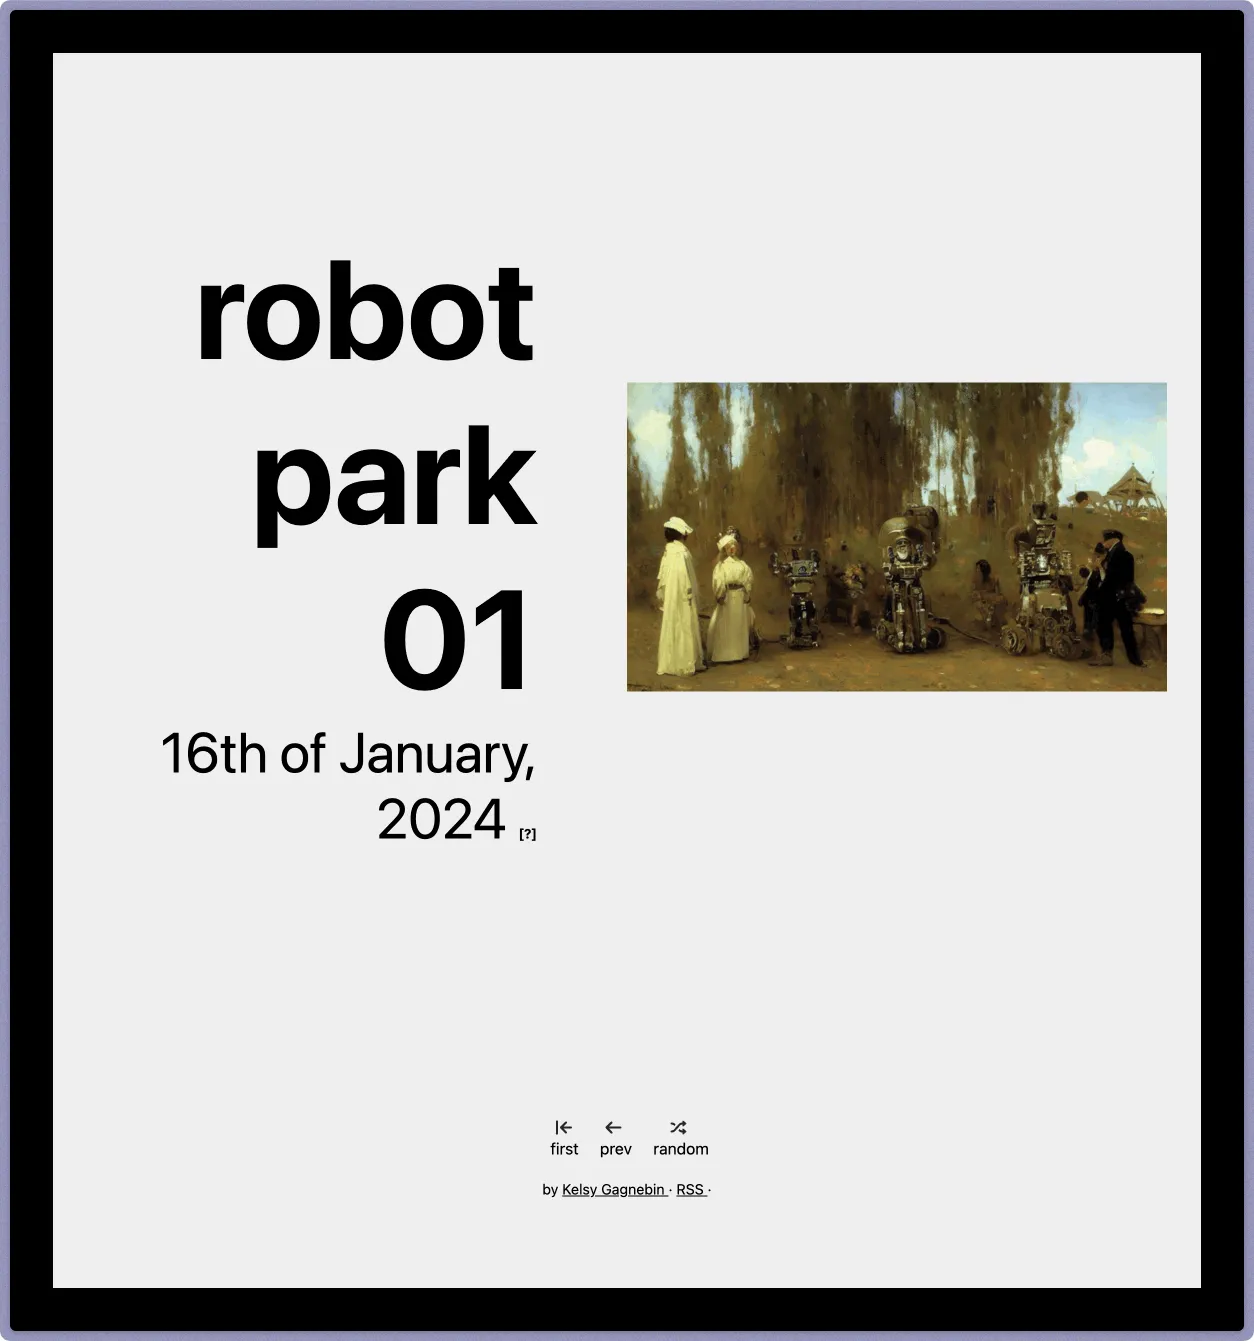 A digital comic titled 'robot park 01' with an illustration resembling a classical painting, featuring robots among human figures, dated 16th of January, 2024